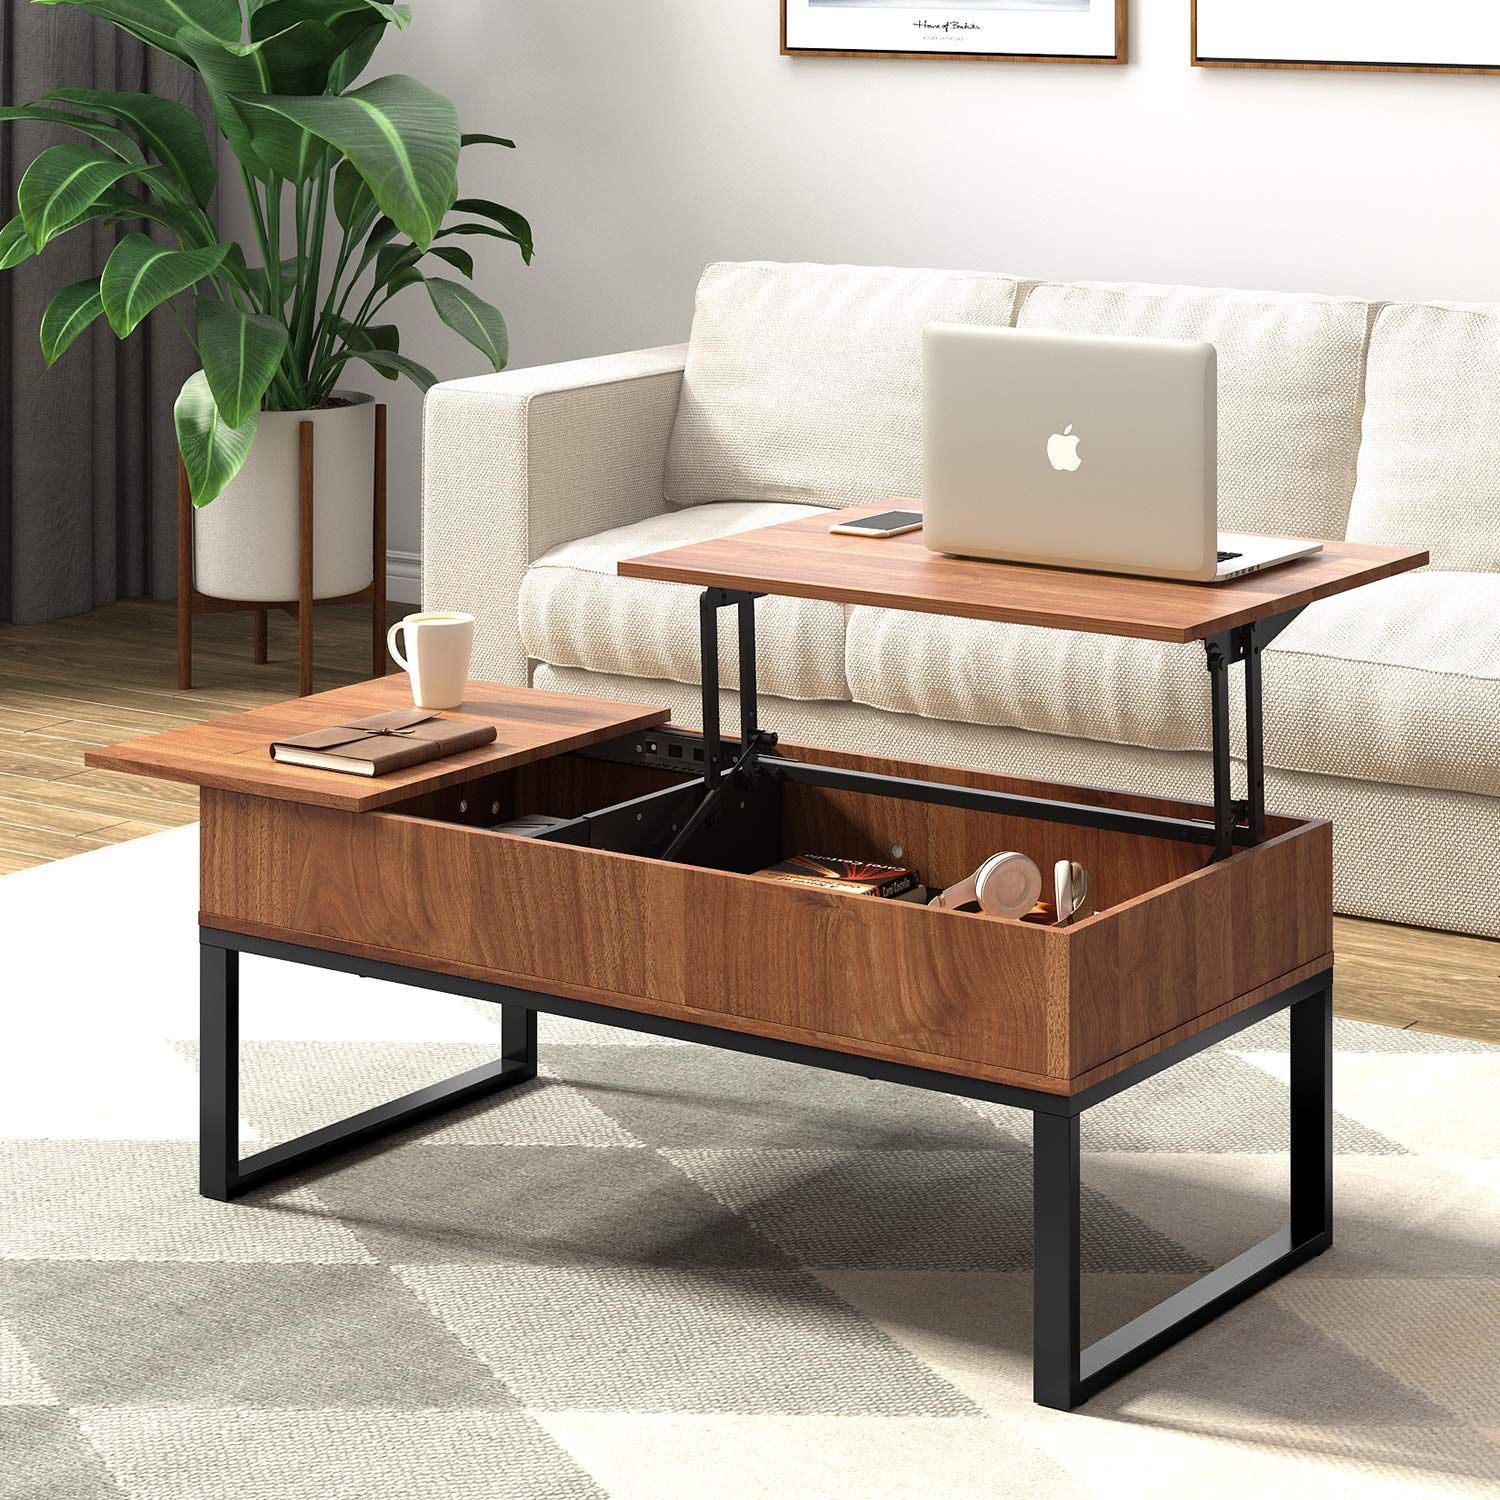 Wlive Wood Coffee Table With Adjustable Lift Top Table, Metal Frame Pertaining To Lift Top Coffee Tables With Hidden Storage Compartments (View 5 of 20)